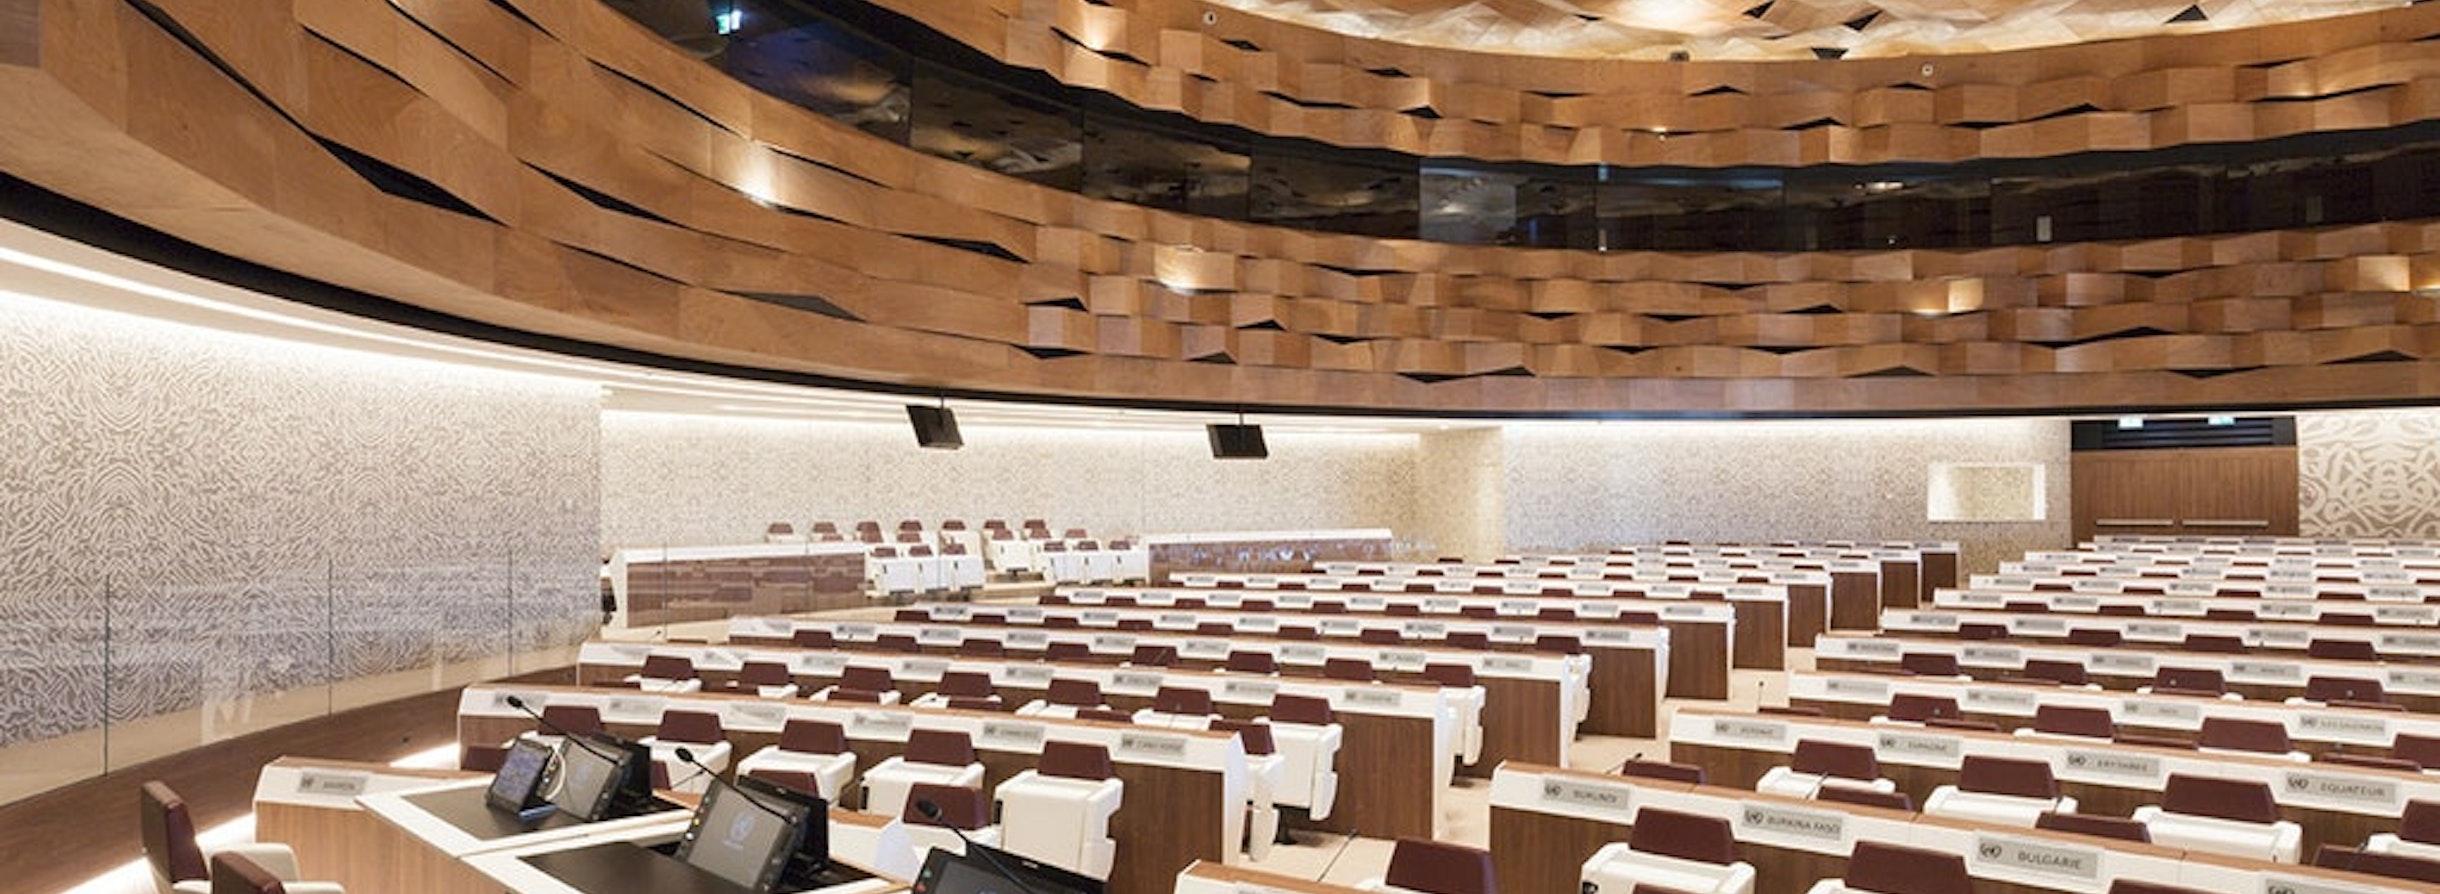 special-united-nation-conference-room-flos-05